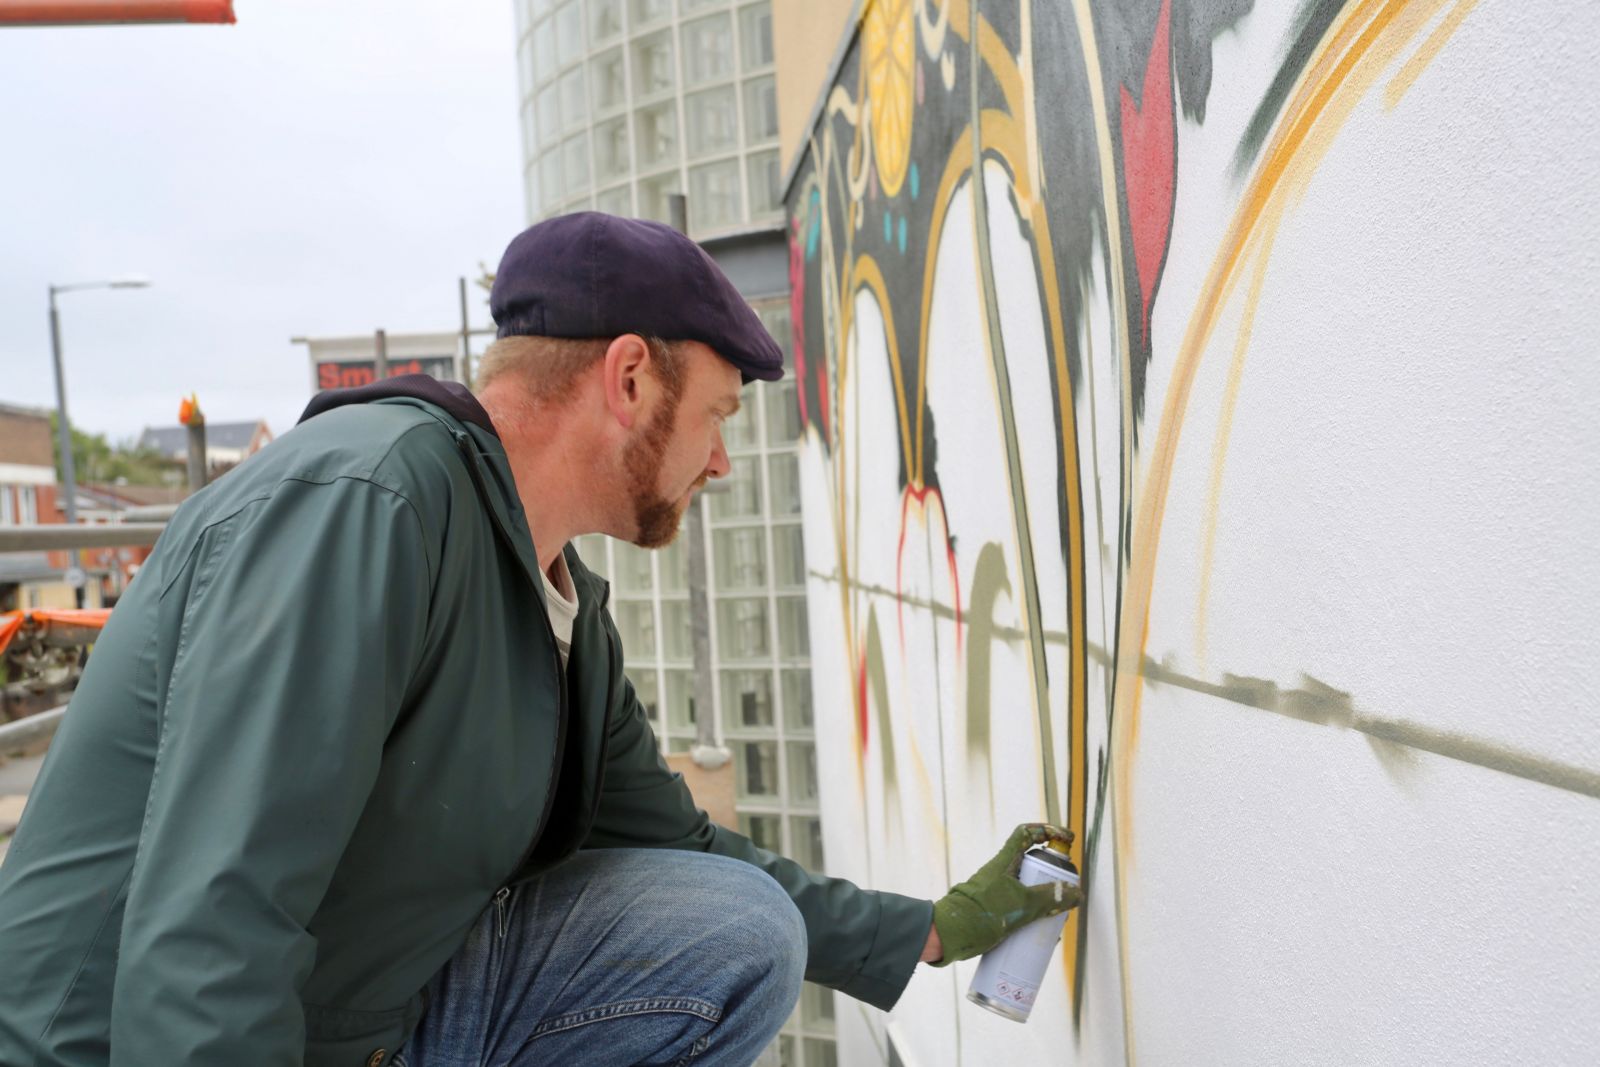 Local artist Rob Wheeler works on a mural outside the St Pauls Learning Centre.